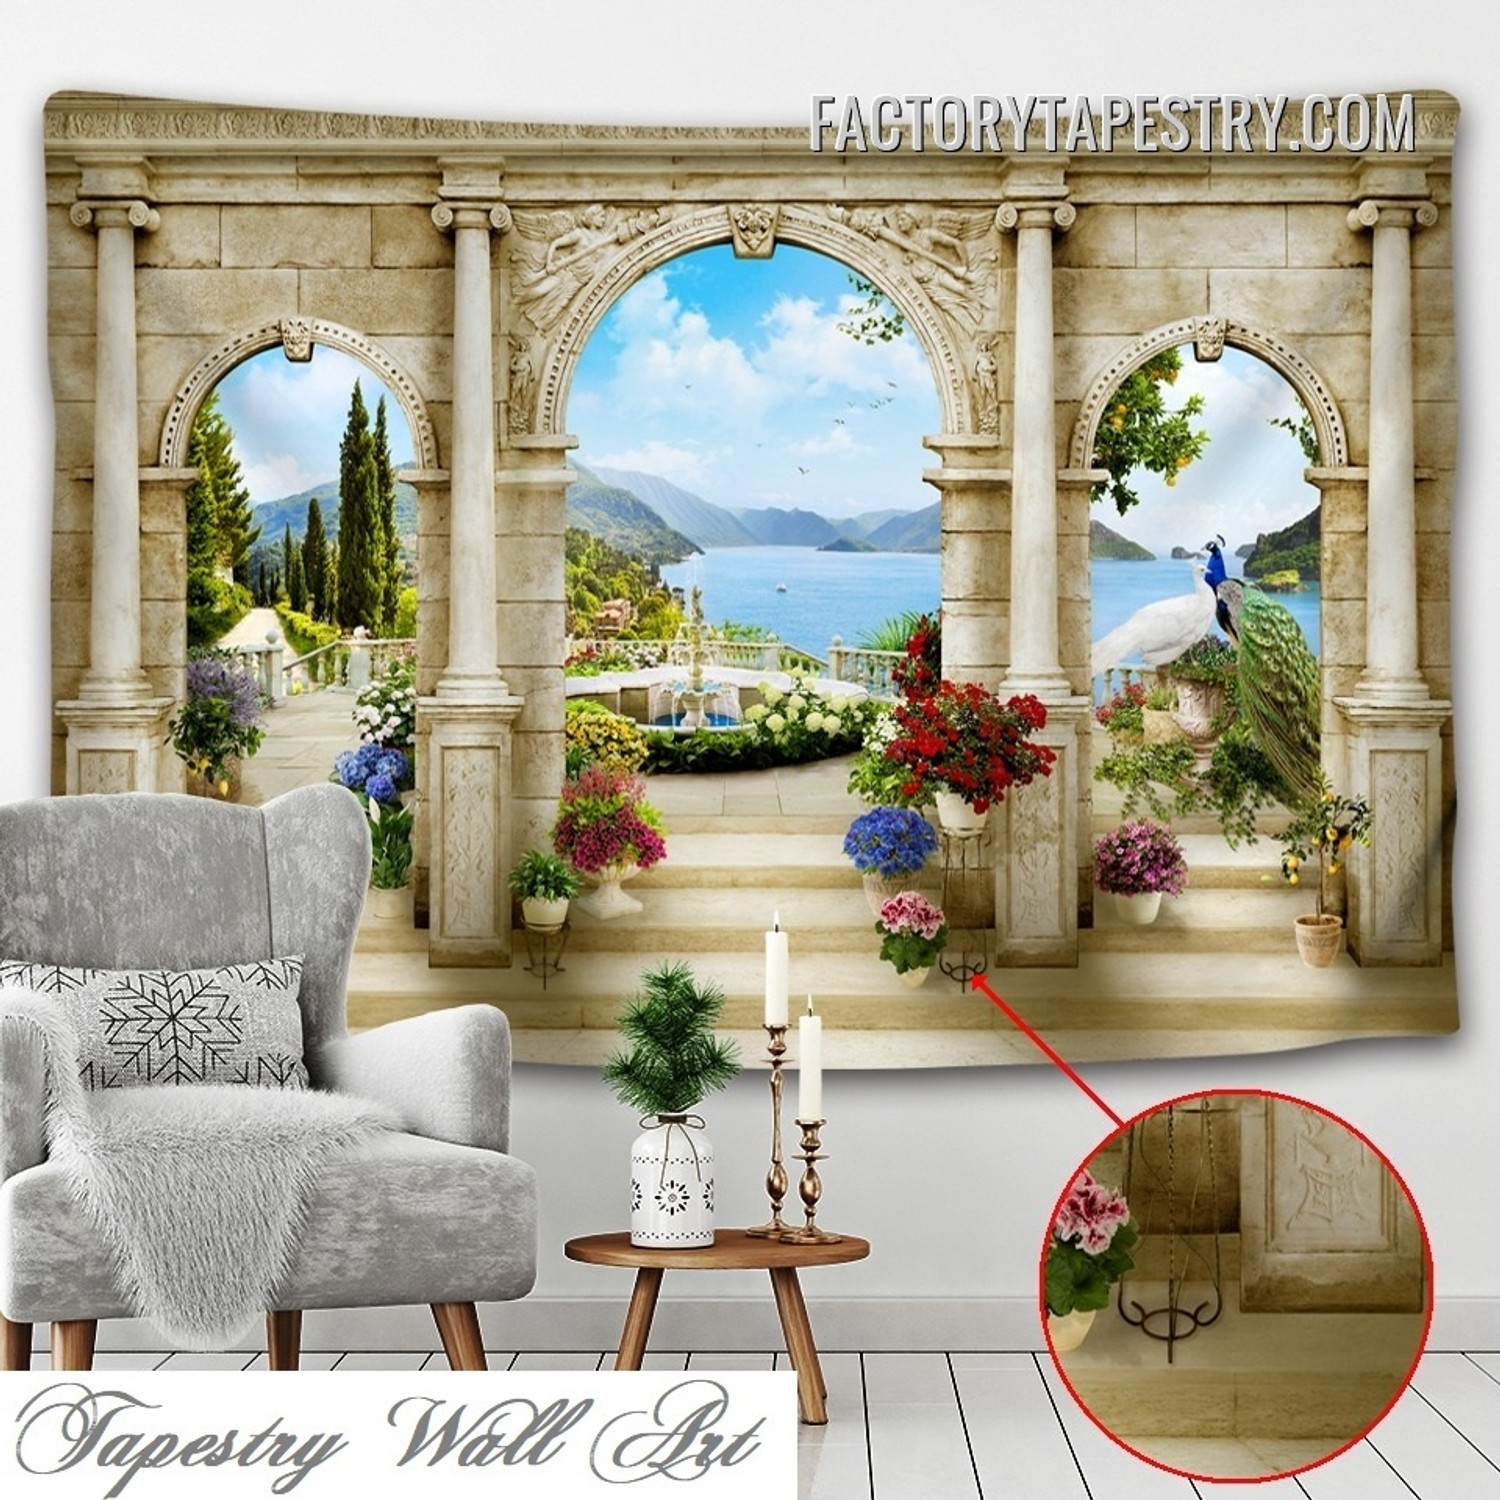 Peacocks on Terrace Architecture Modern Landscape Wall Art Tapestry